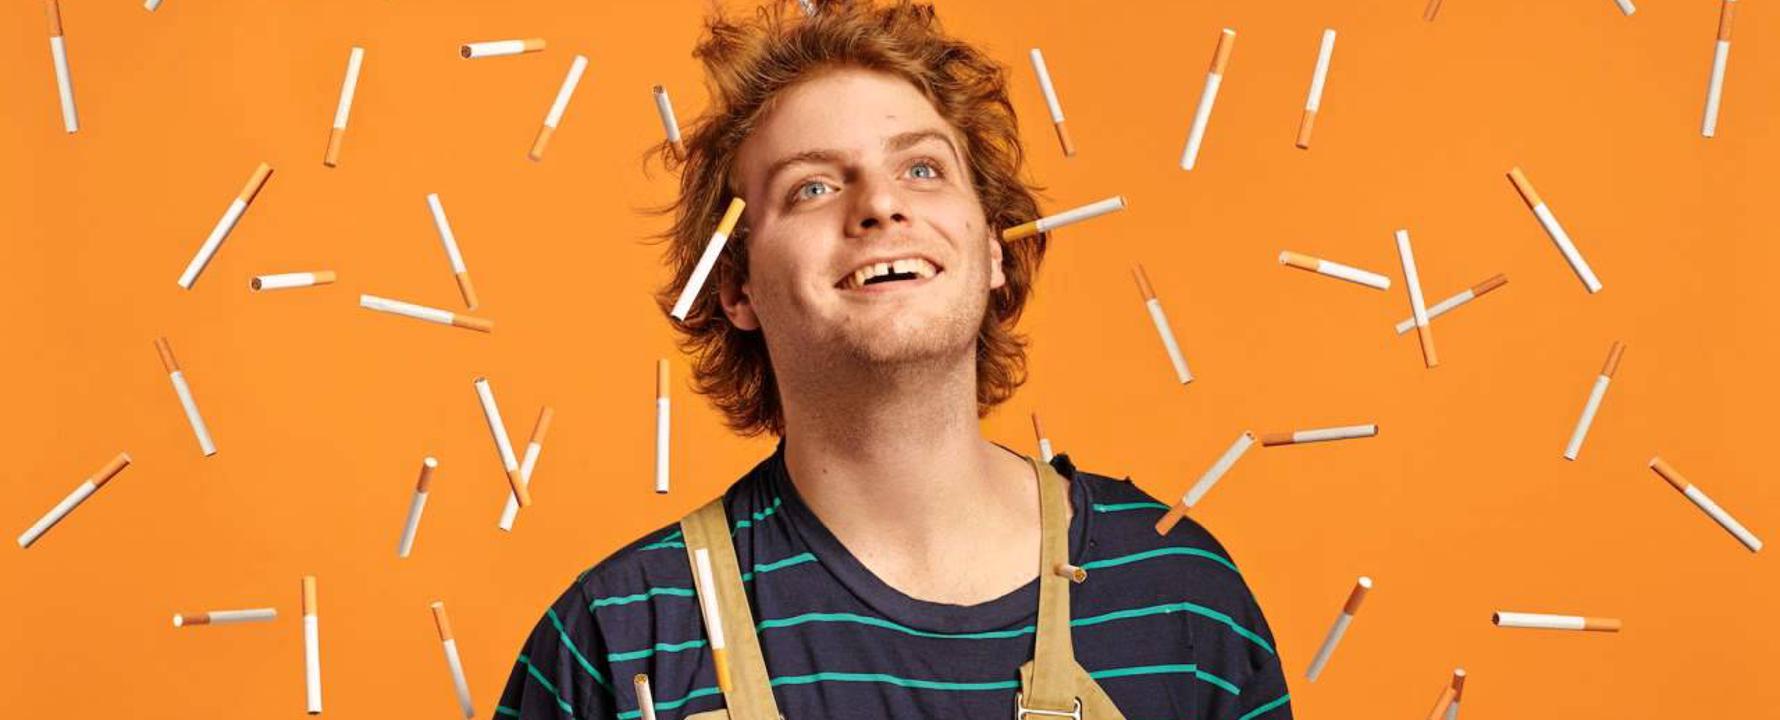 Promotional photograph of Mac Demarco.